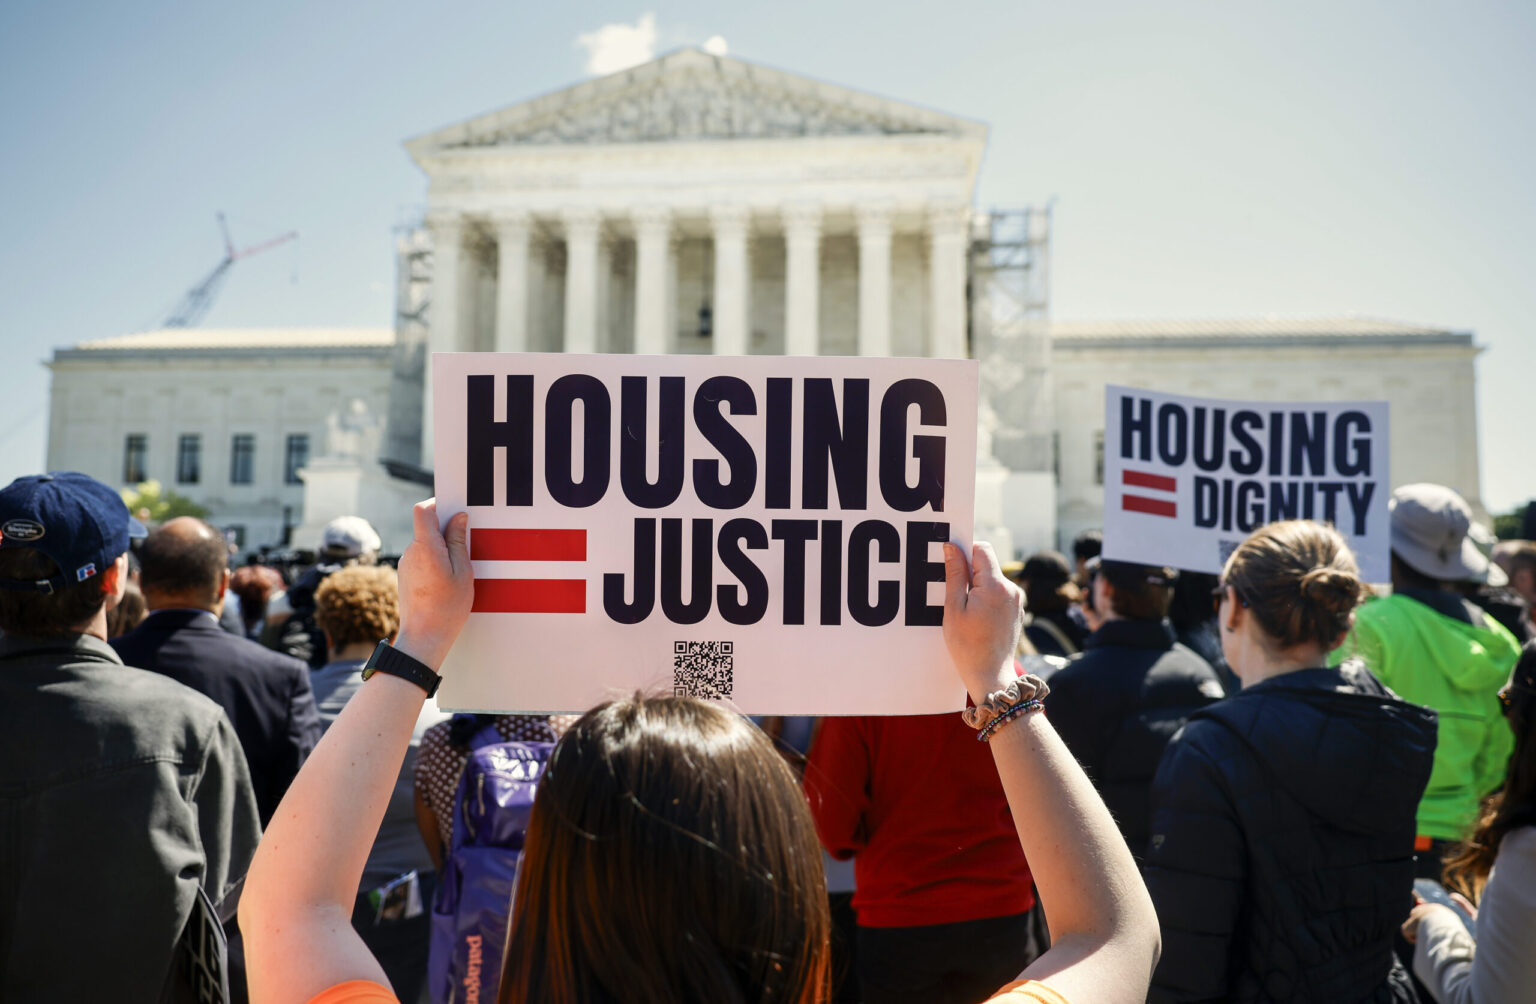 Liberal justices advocate for protections against criminalizing homelessness (Credits: Getty Images)